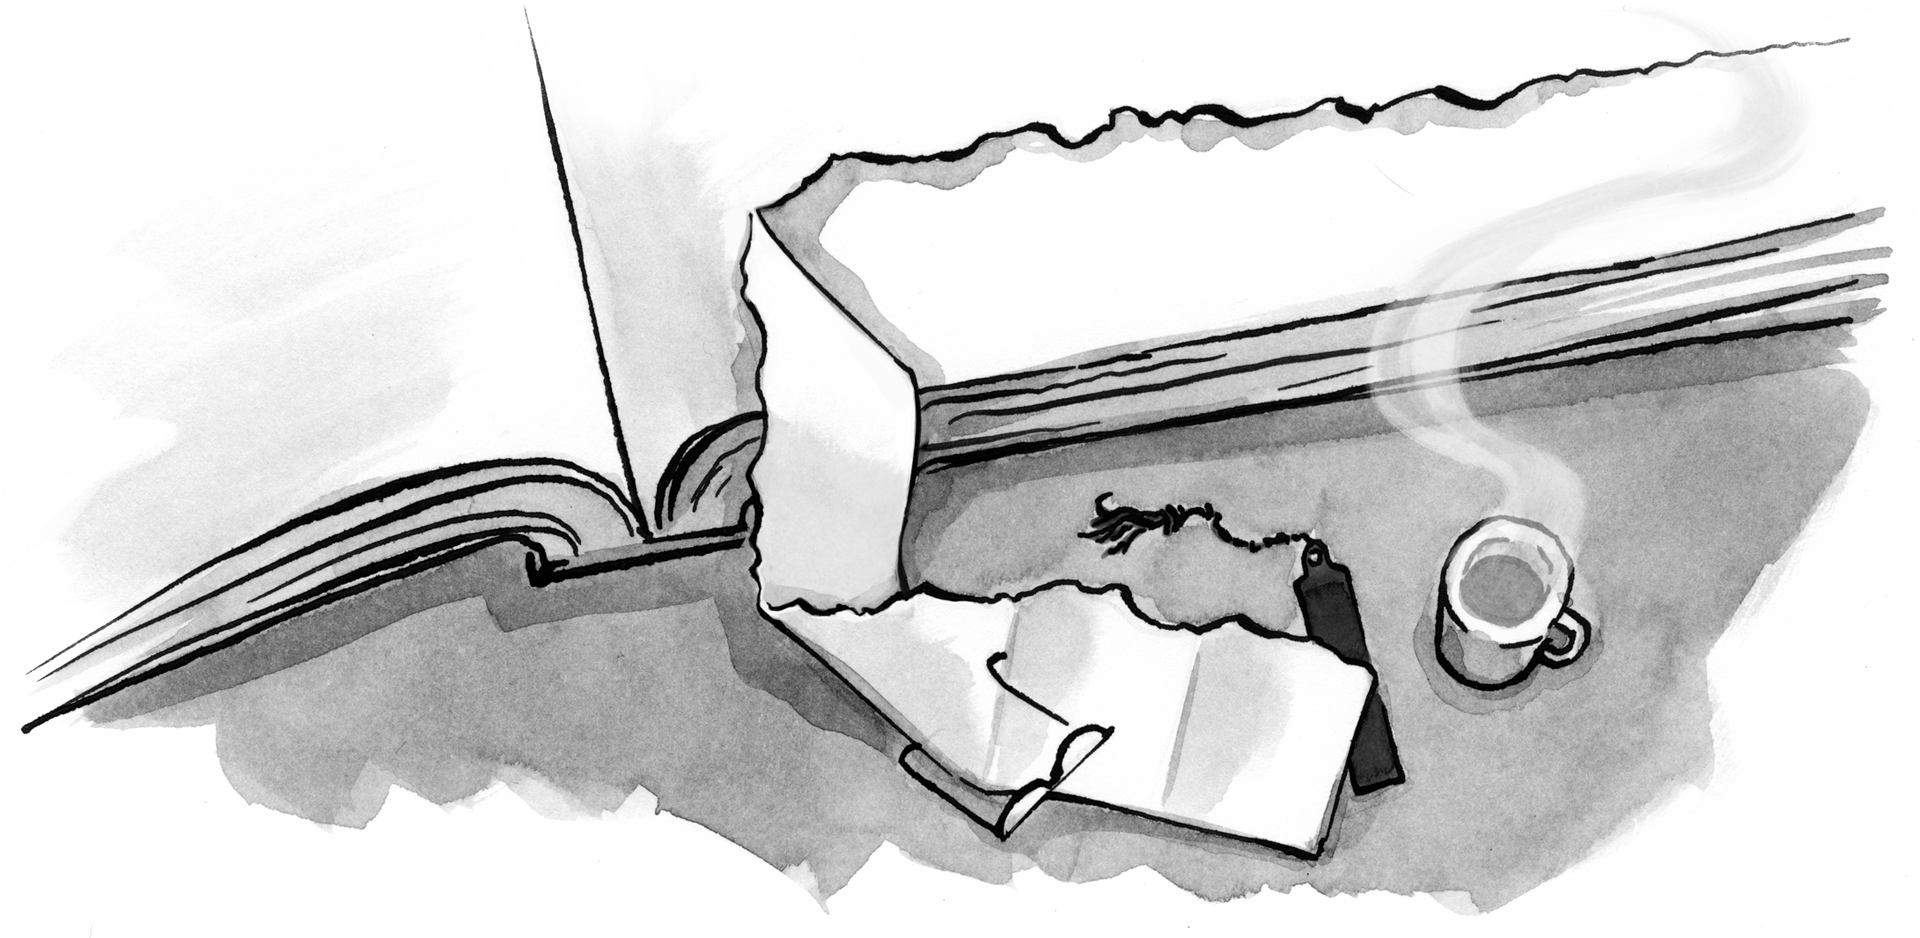 Illustration: A small piece of paper is torn from a very large book with some glasses, a bookmark, and a steaming mug of something delicious nearby.